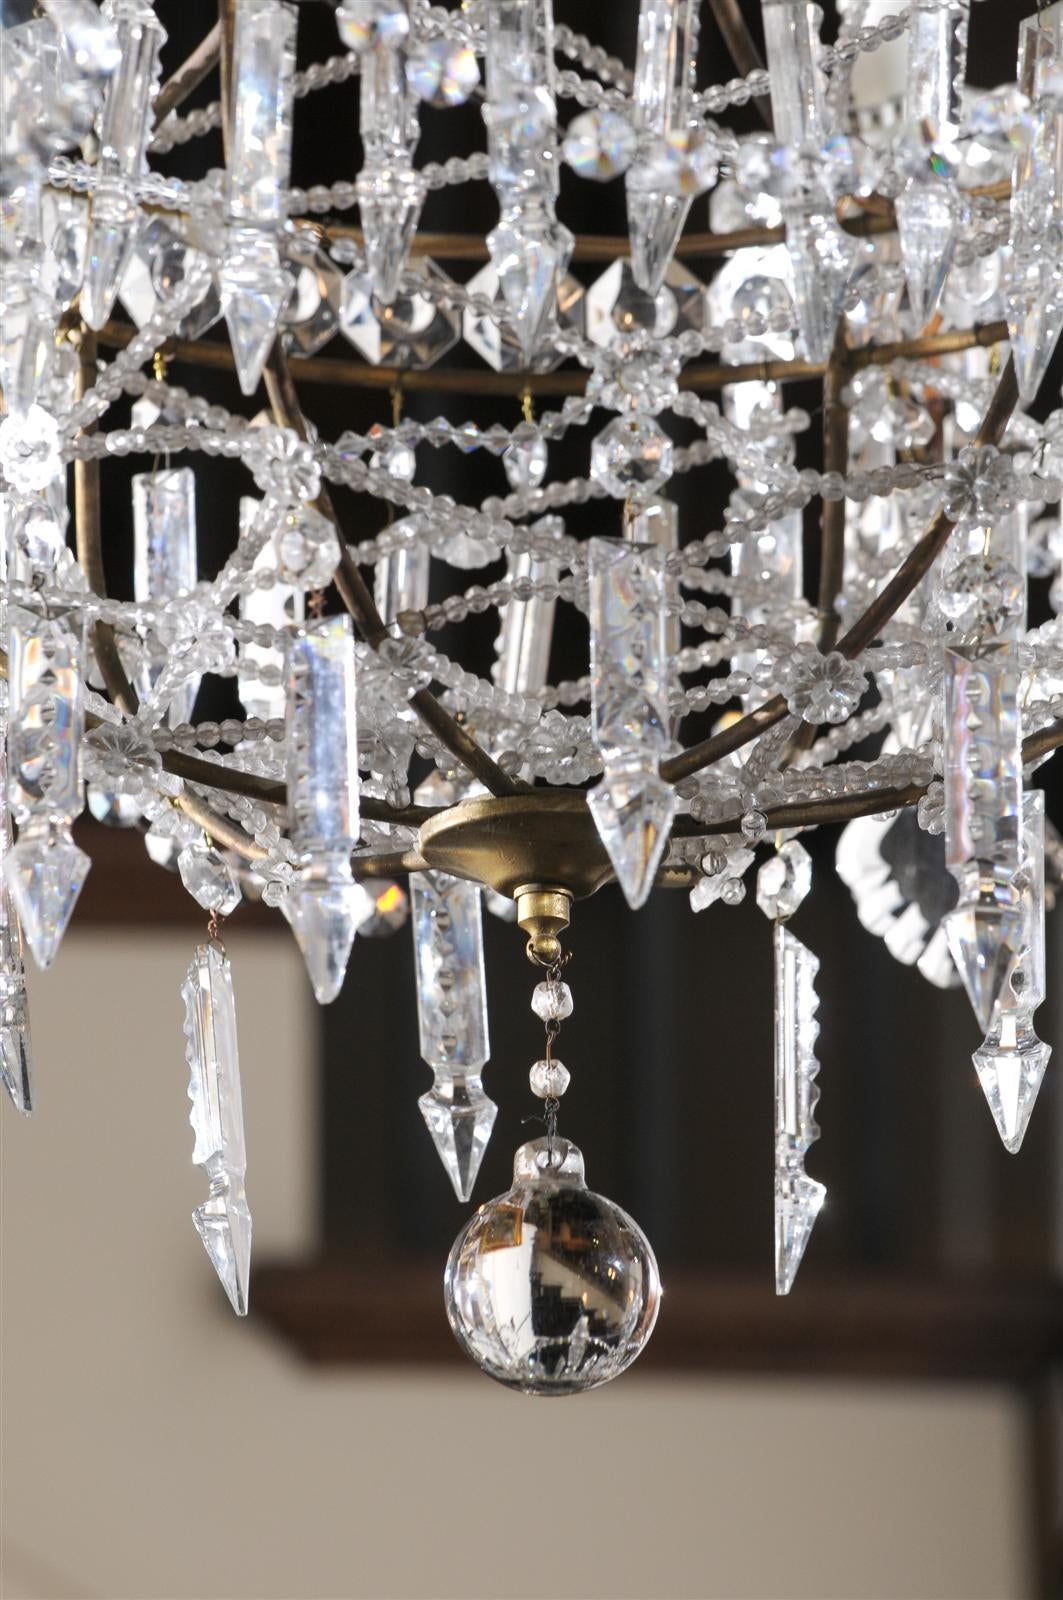 Italian Six-Light Crystal Basket Chandelier from the Early 20th Century For Sale 3